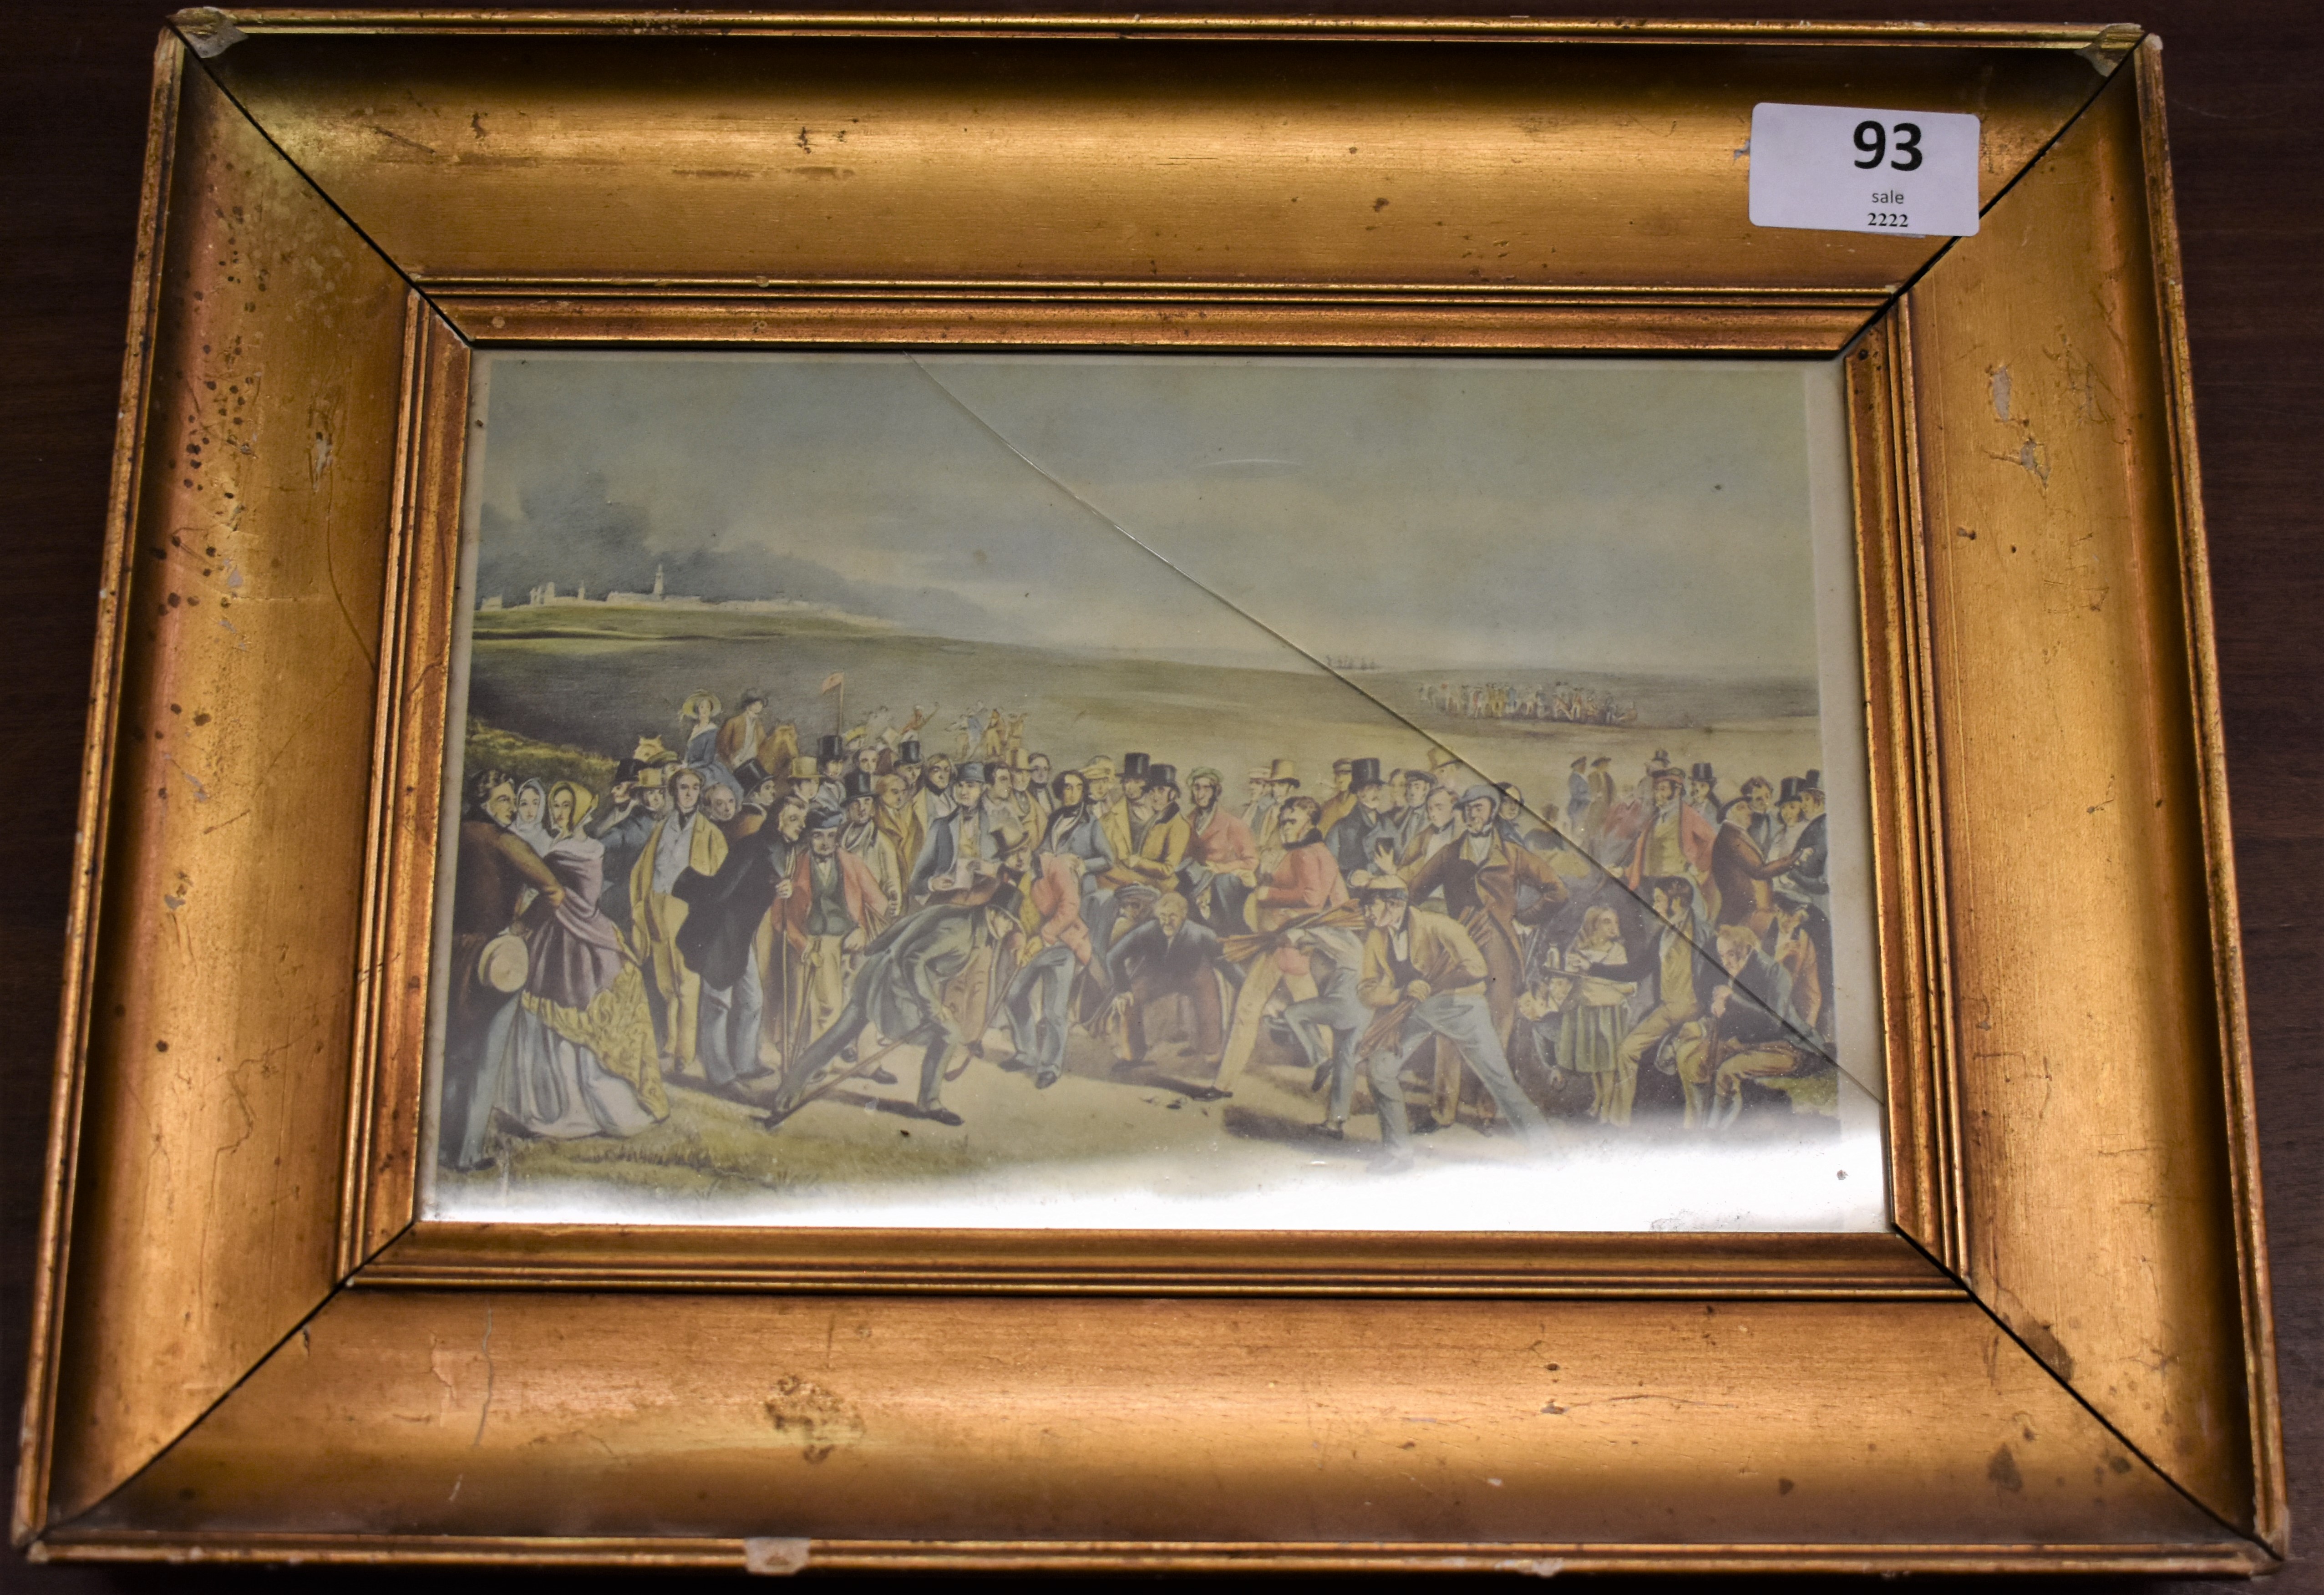 Victorian Golfing Print, Distinguished Gentlemen inspecting who has the ball closer to the hold.